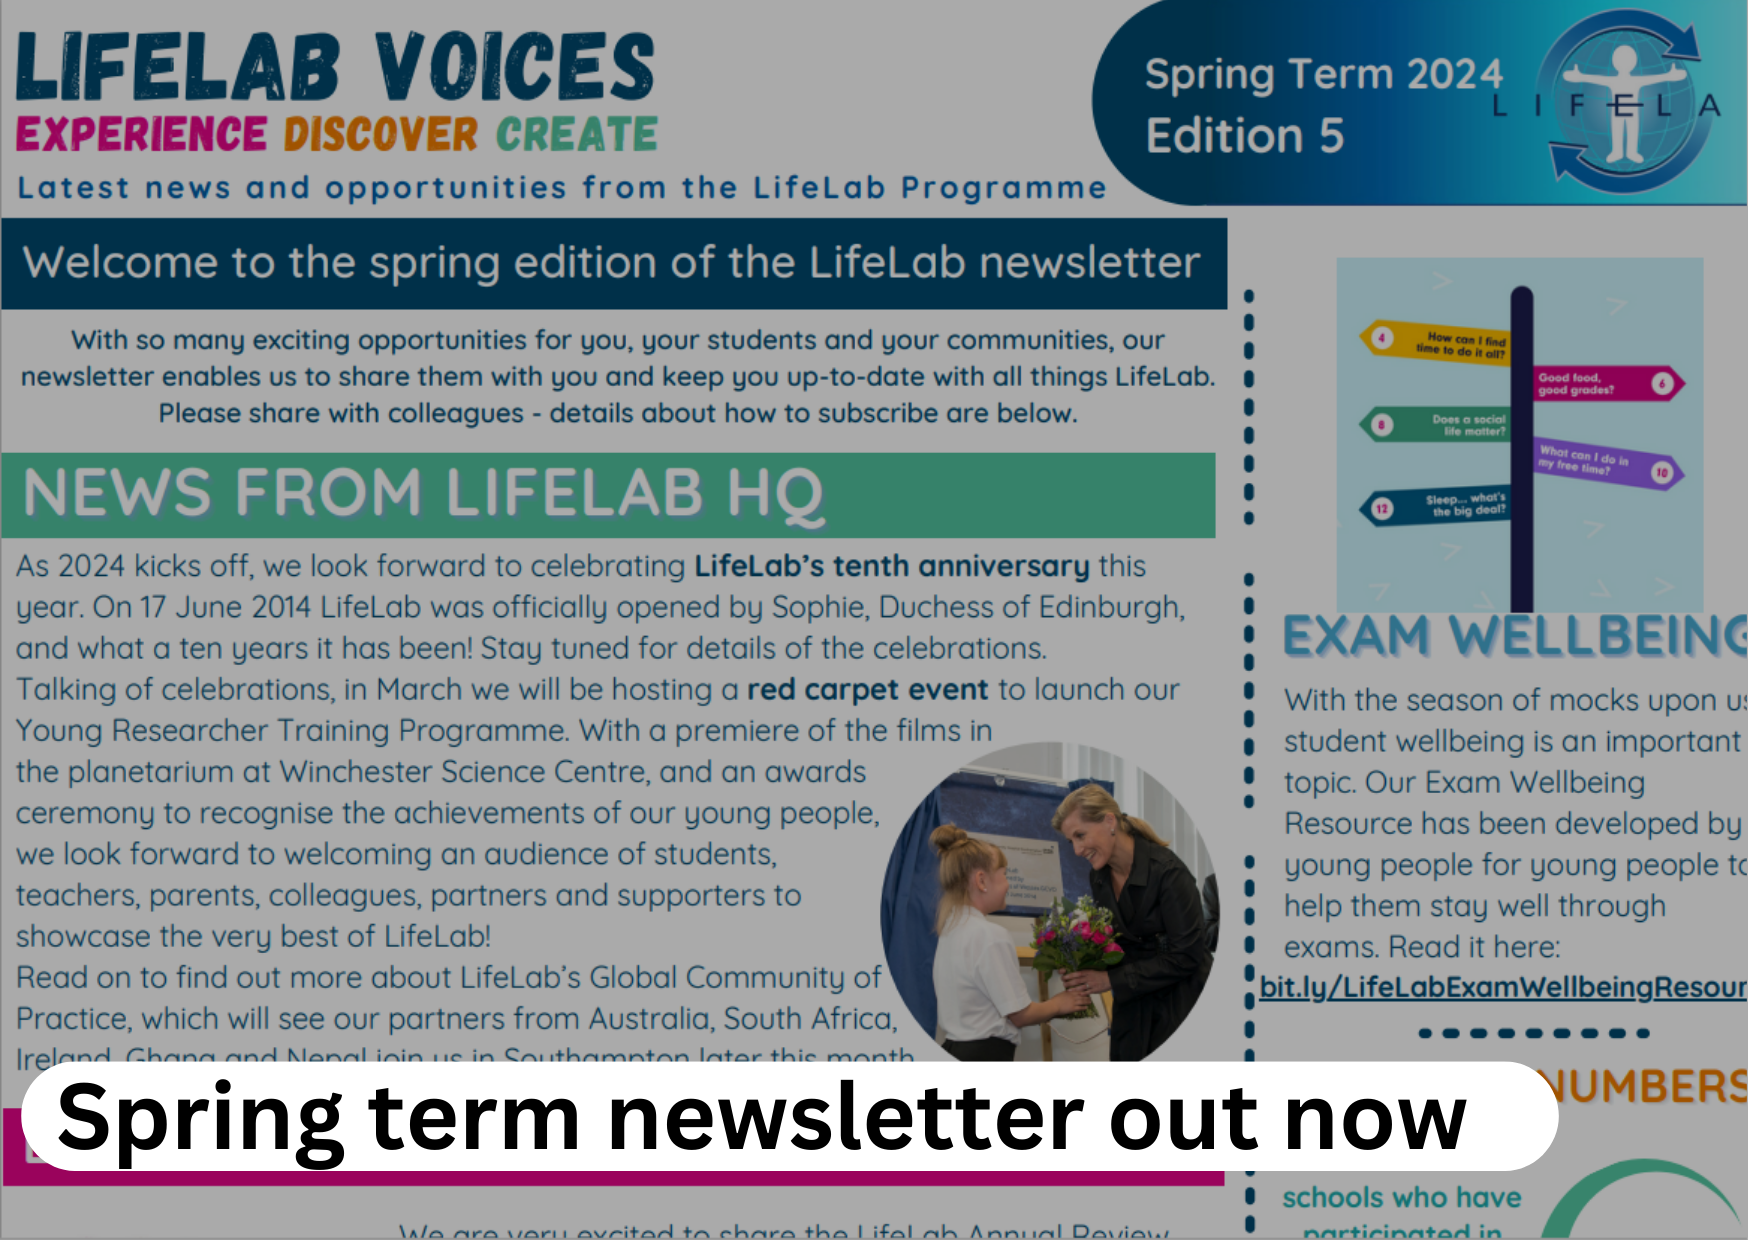 Spring Term Newsletter out now